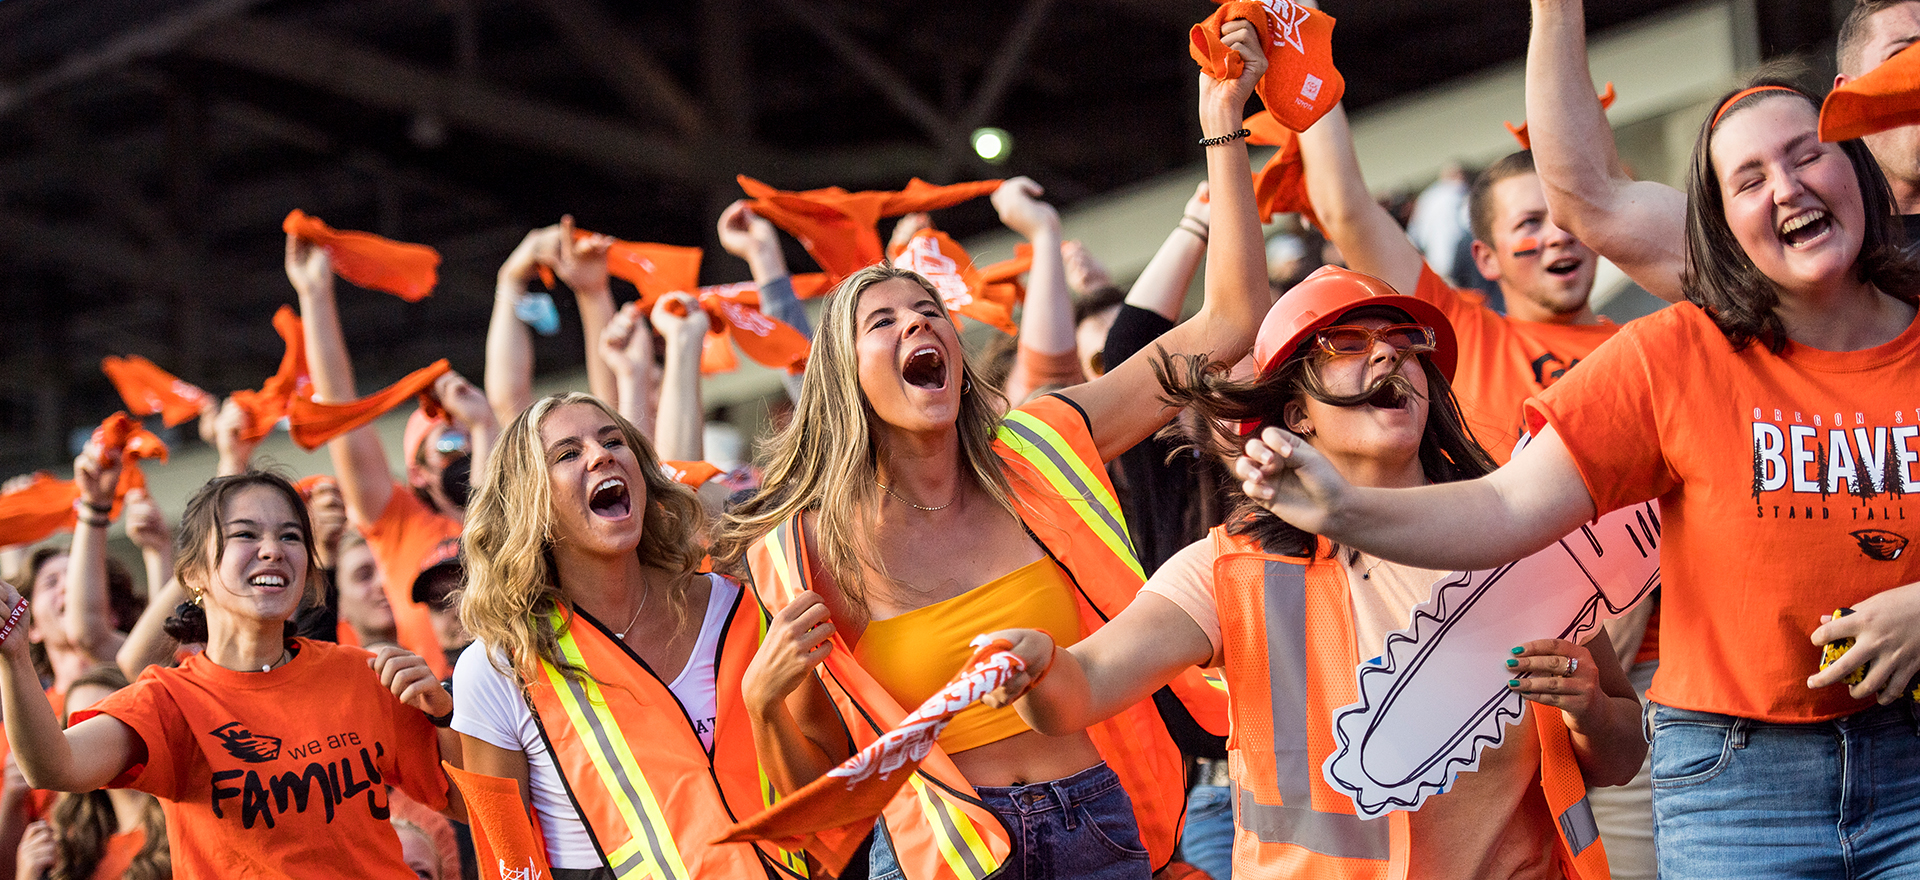 Student fans cheering on the OSU Beavers football team